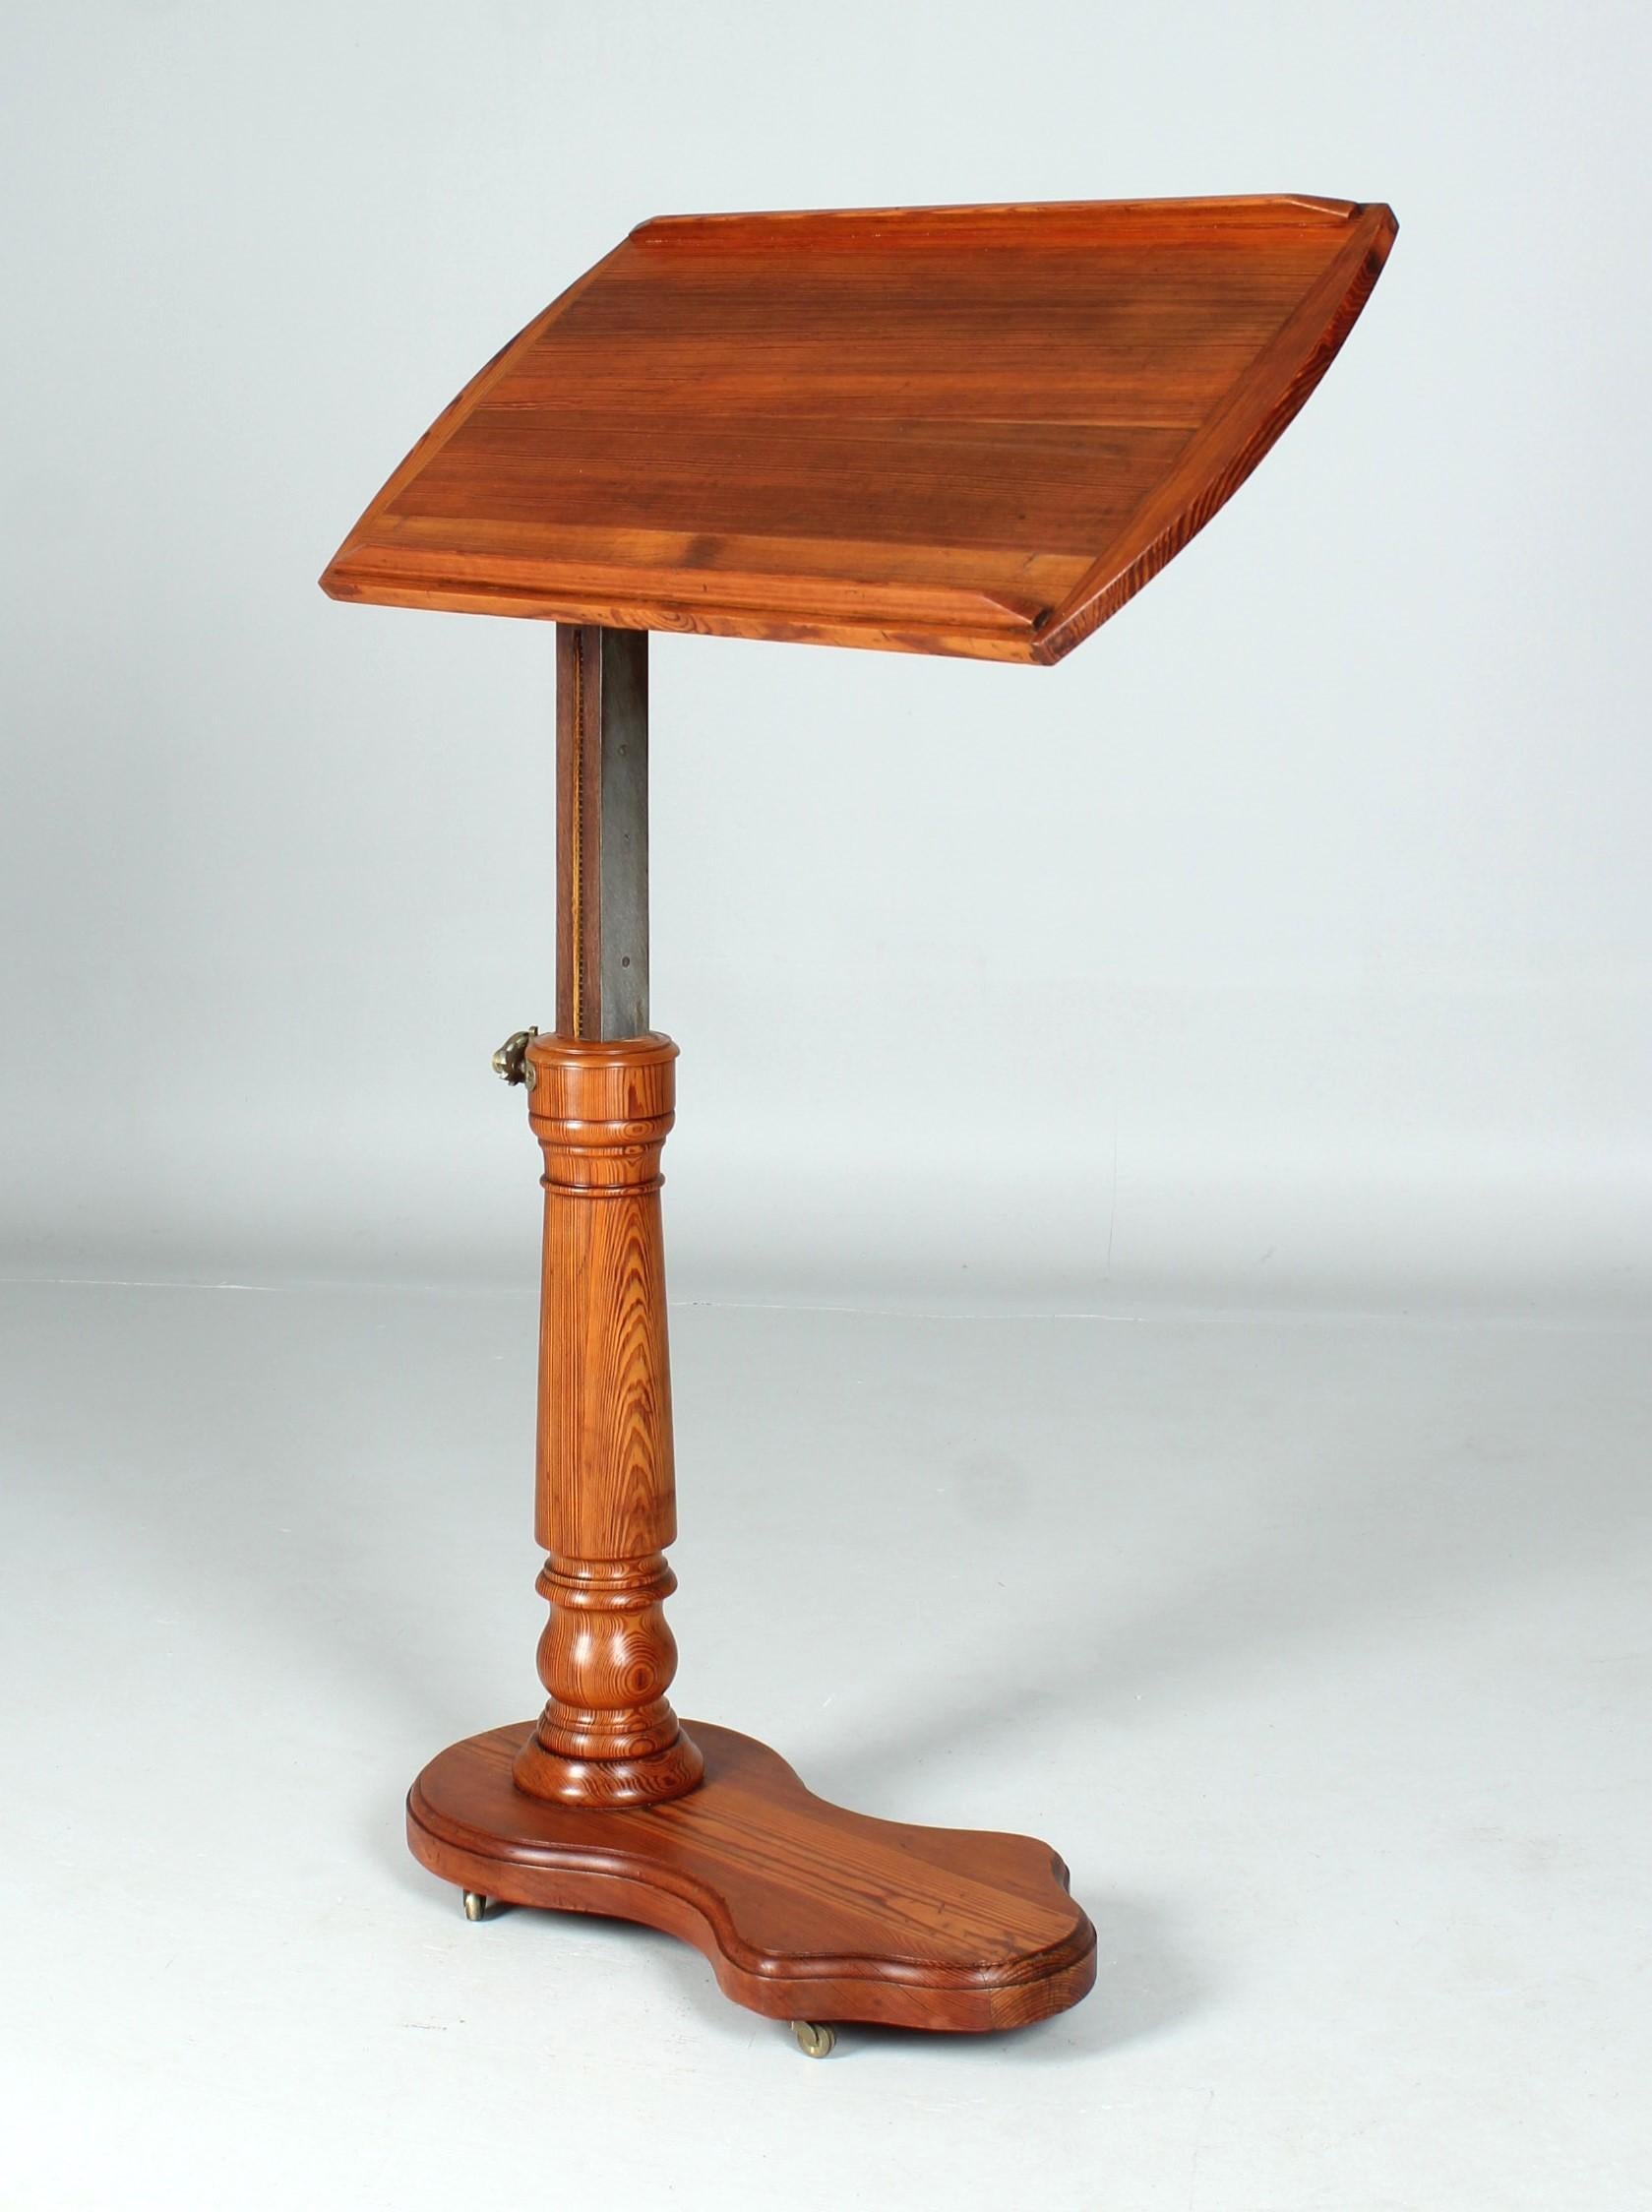 Antique height-adjustable reading table

France (Paris)
Pitch Pine
Late 19th century

Dimensions: height: 81-115 cm, width: 80 cm, depth: 40 cm

Description:
Reading table made of solid pine wood, adjustable in height and inclination.

The table top